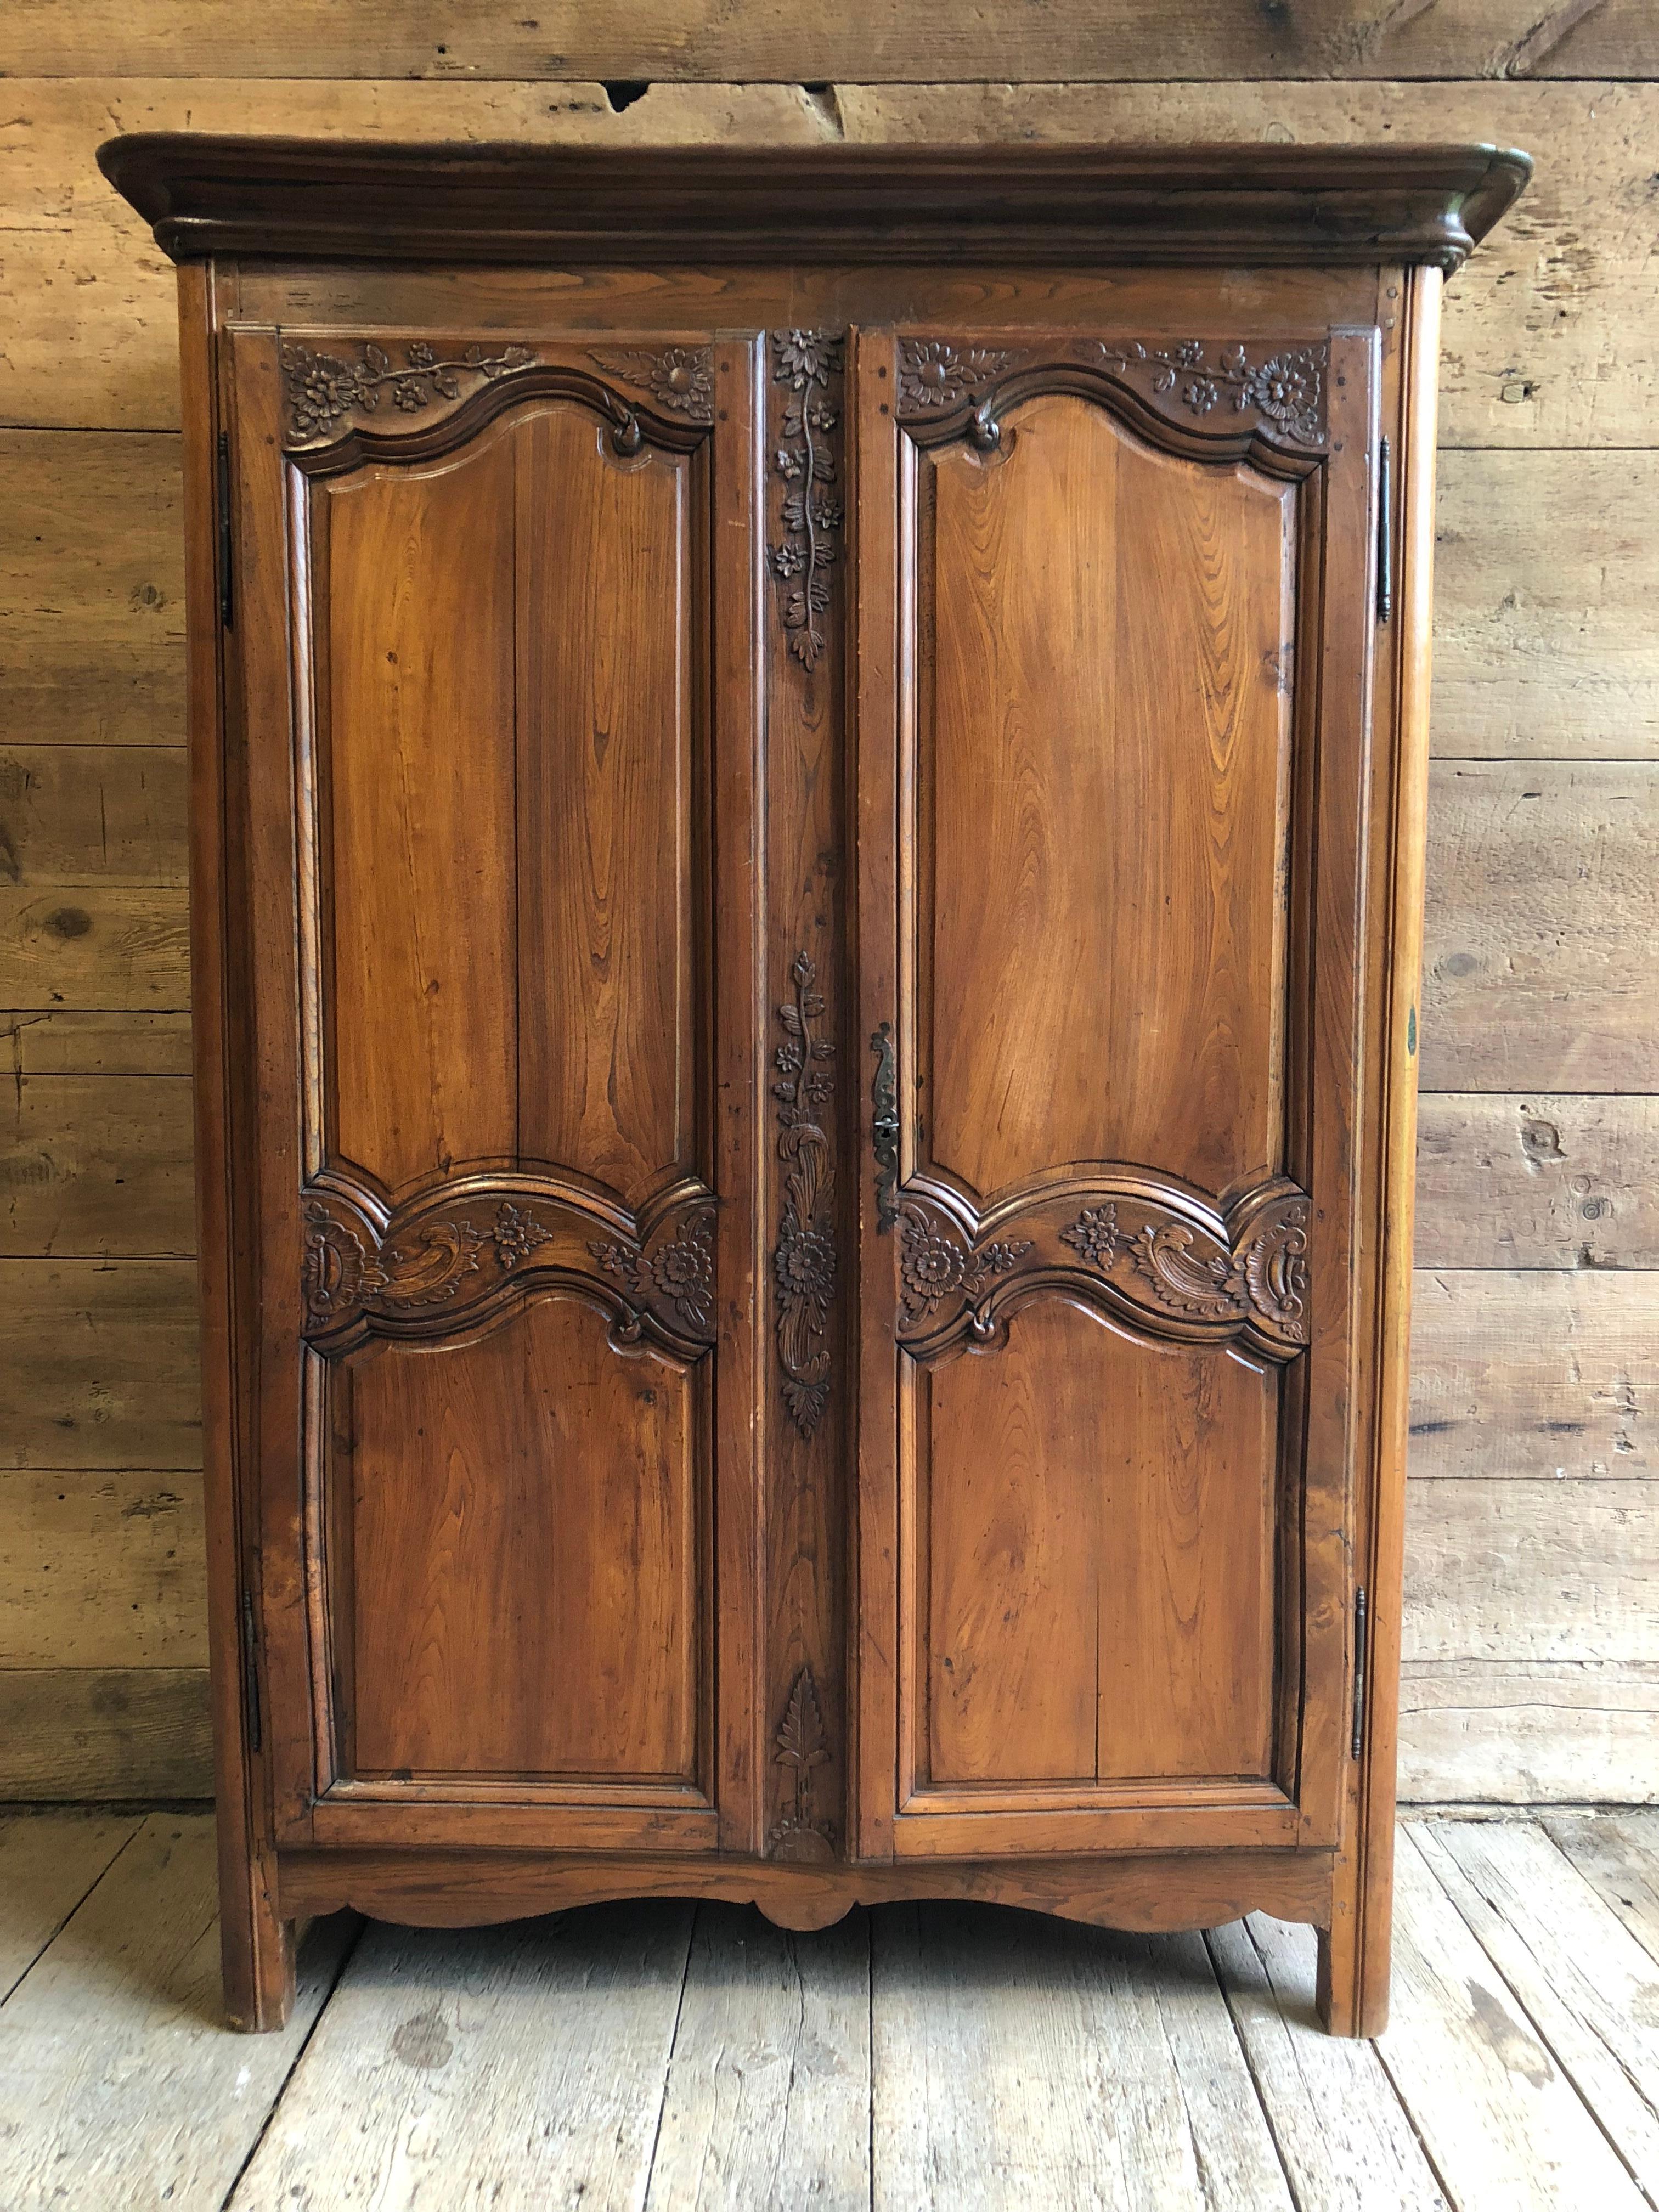 A small scale Louis XV armoire in elm wood, with two doors nicely carved with inset panels, the games carved with vines and flowers. The interior has been recently painted light gray and has 3 adjustable shelves. The piece retains its original